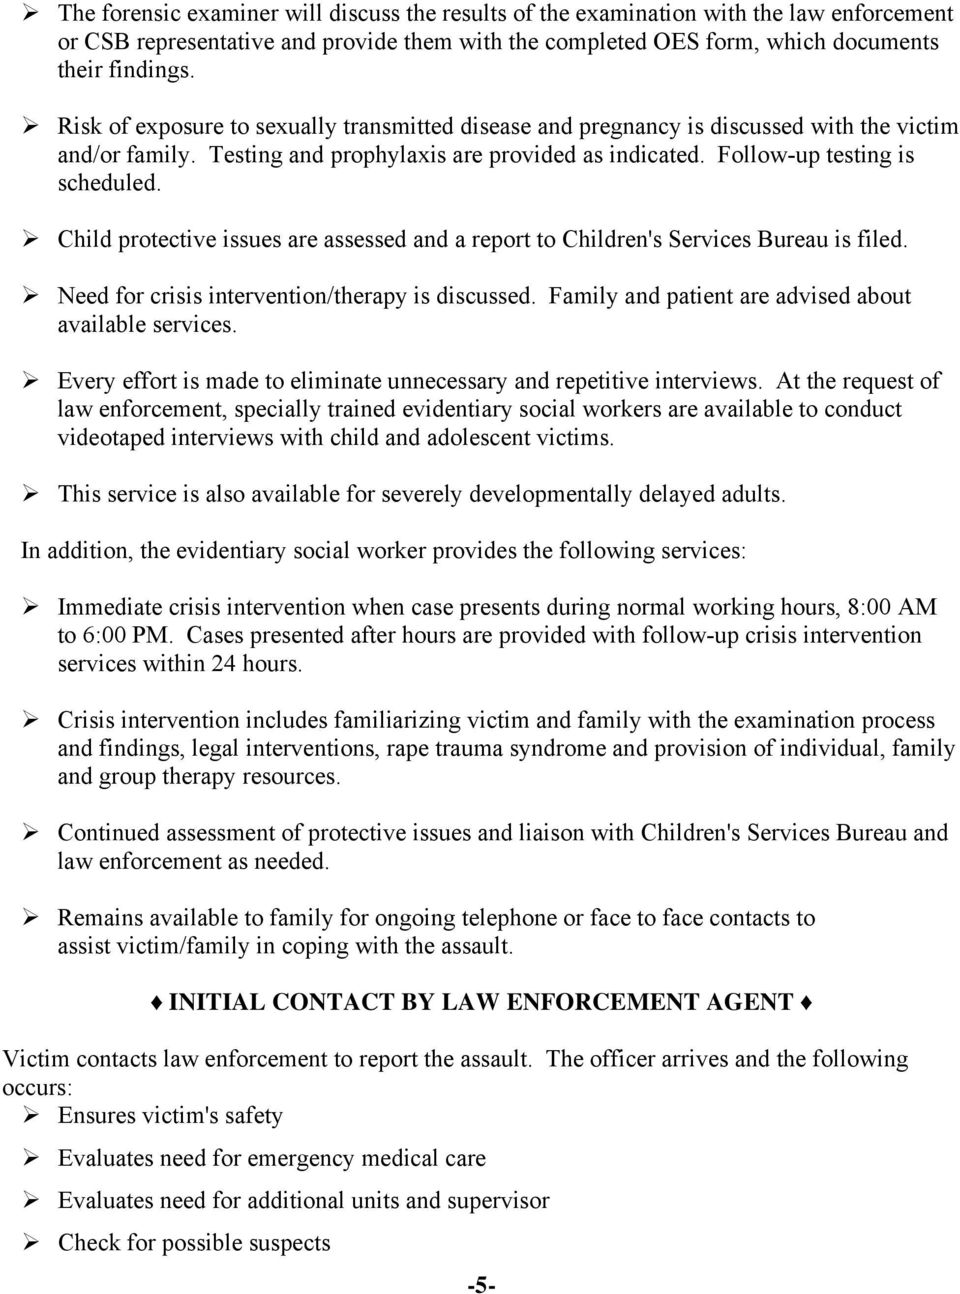 Child protective issues are assessed and a report to Children's Services Bureau is filed. Need for crisis intervention/therapy is discussed. Family and patient are advised about available services.